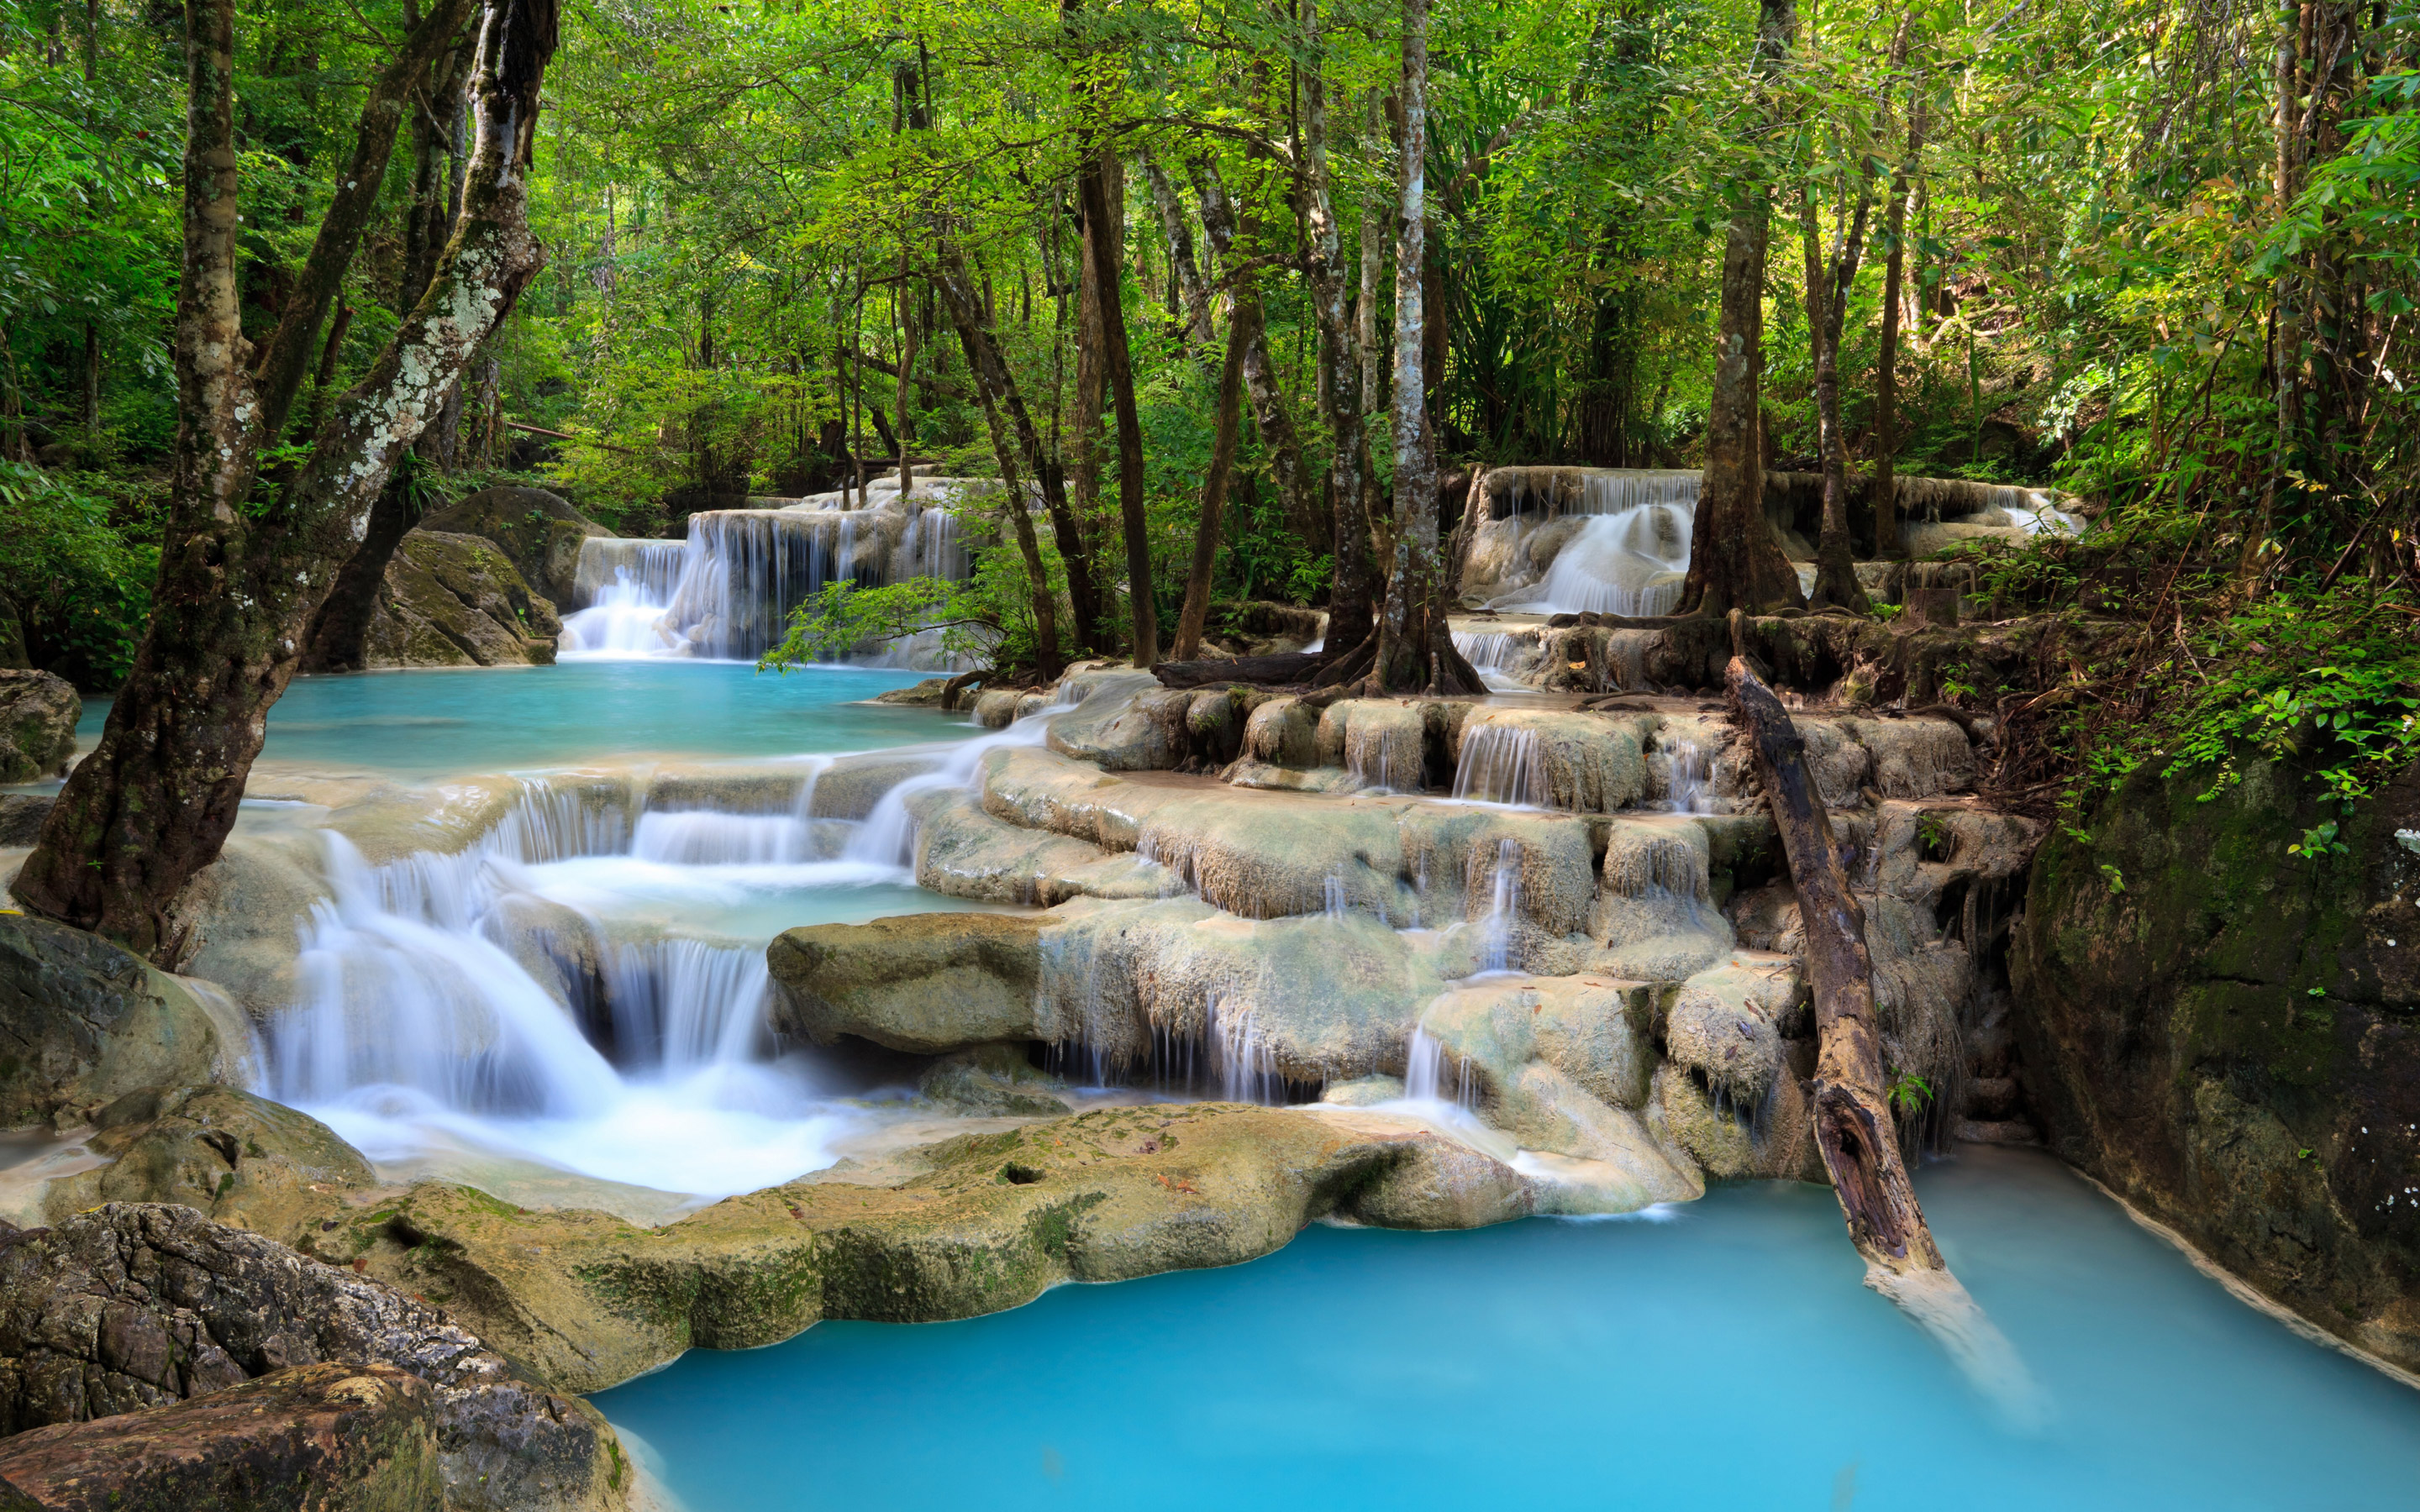 Free download Tropical Waterfall Scenery HD Wallpaper [2880x1800] for